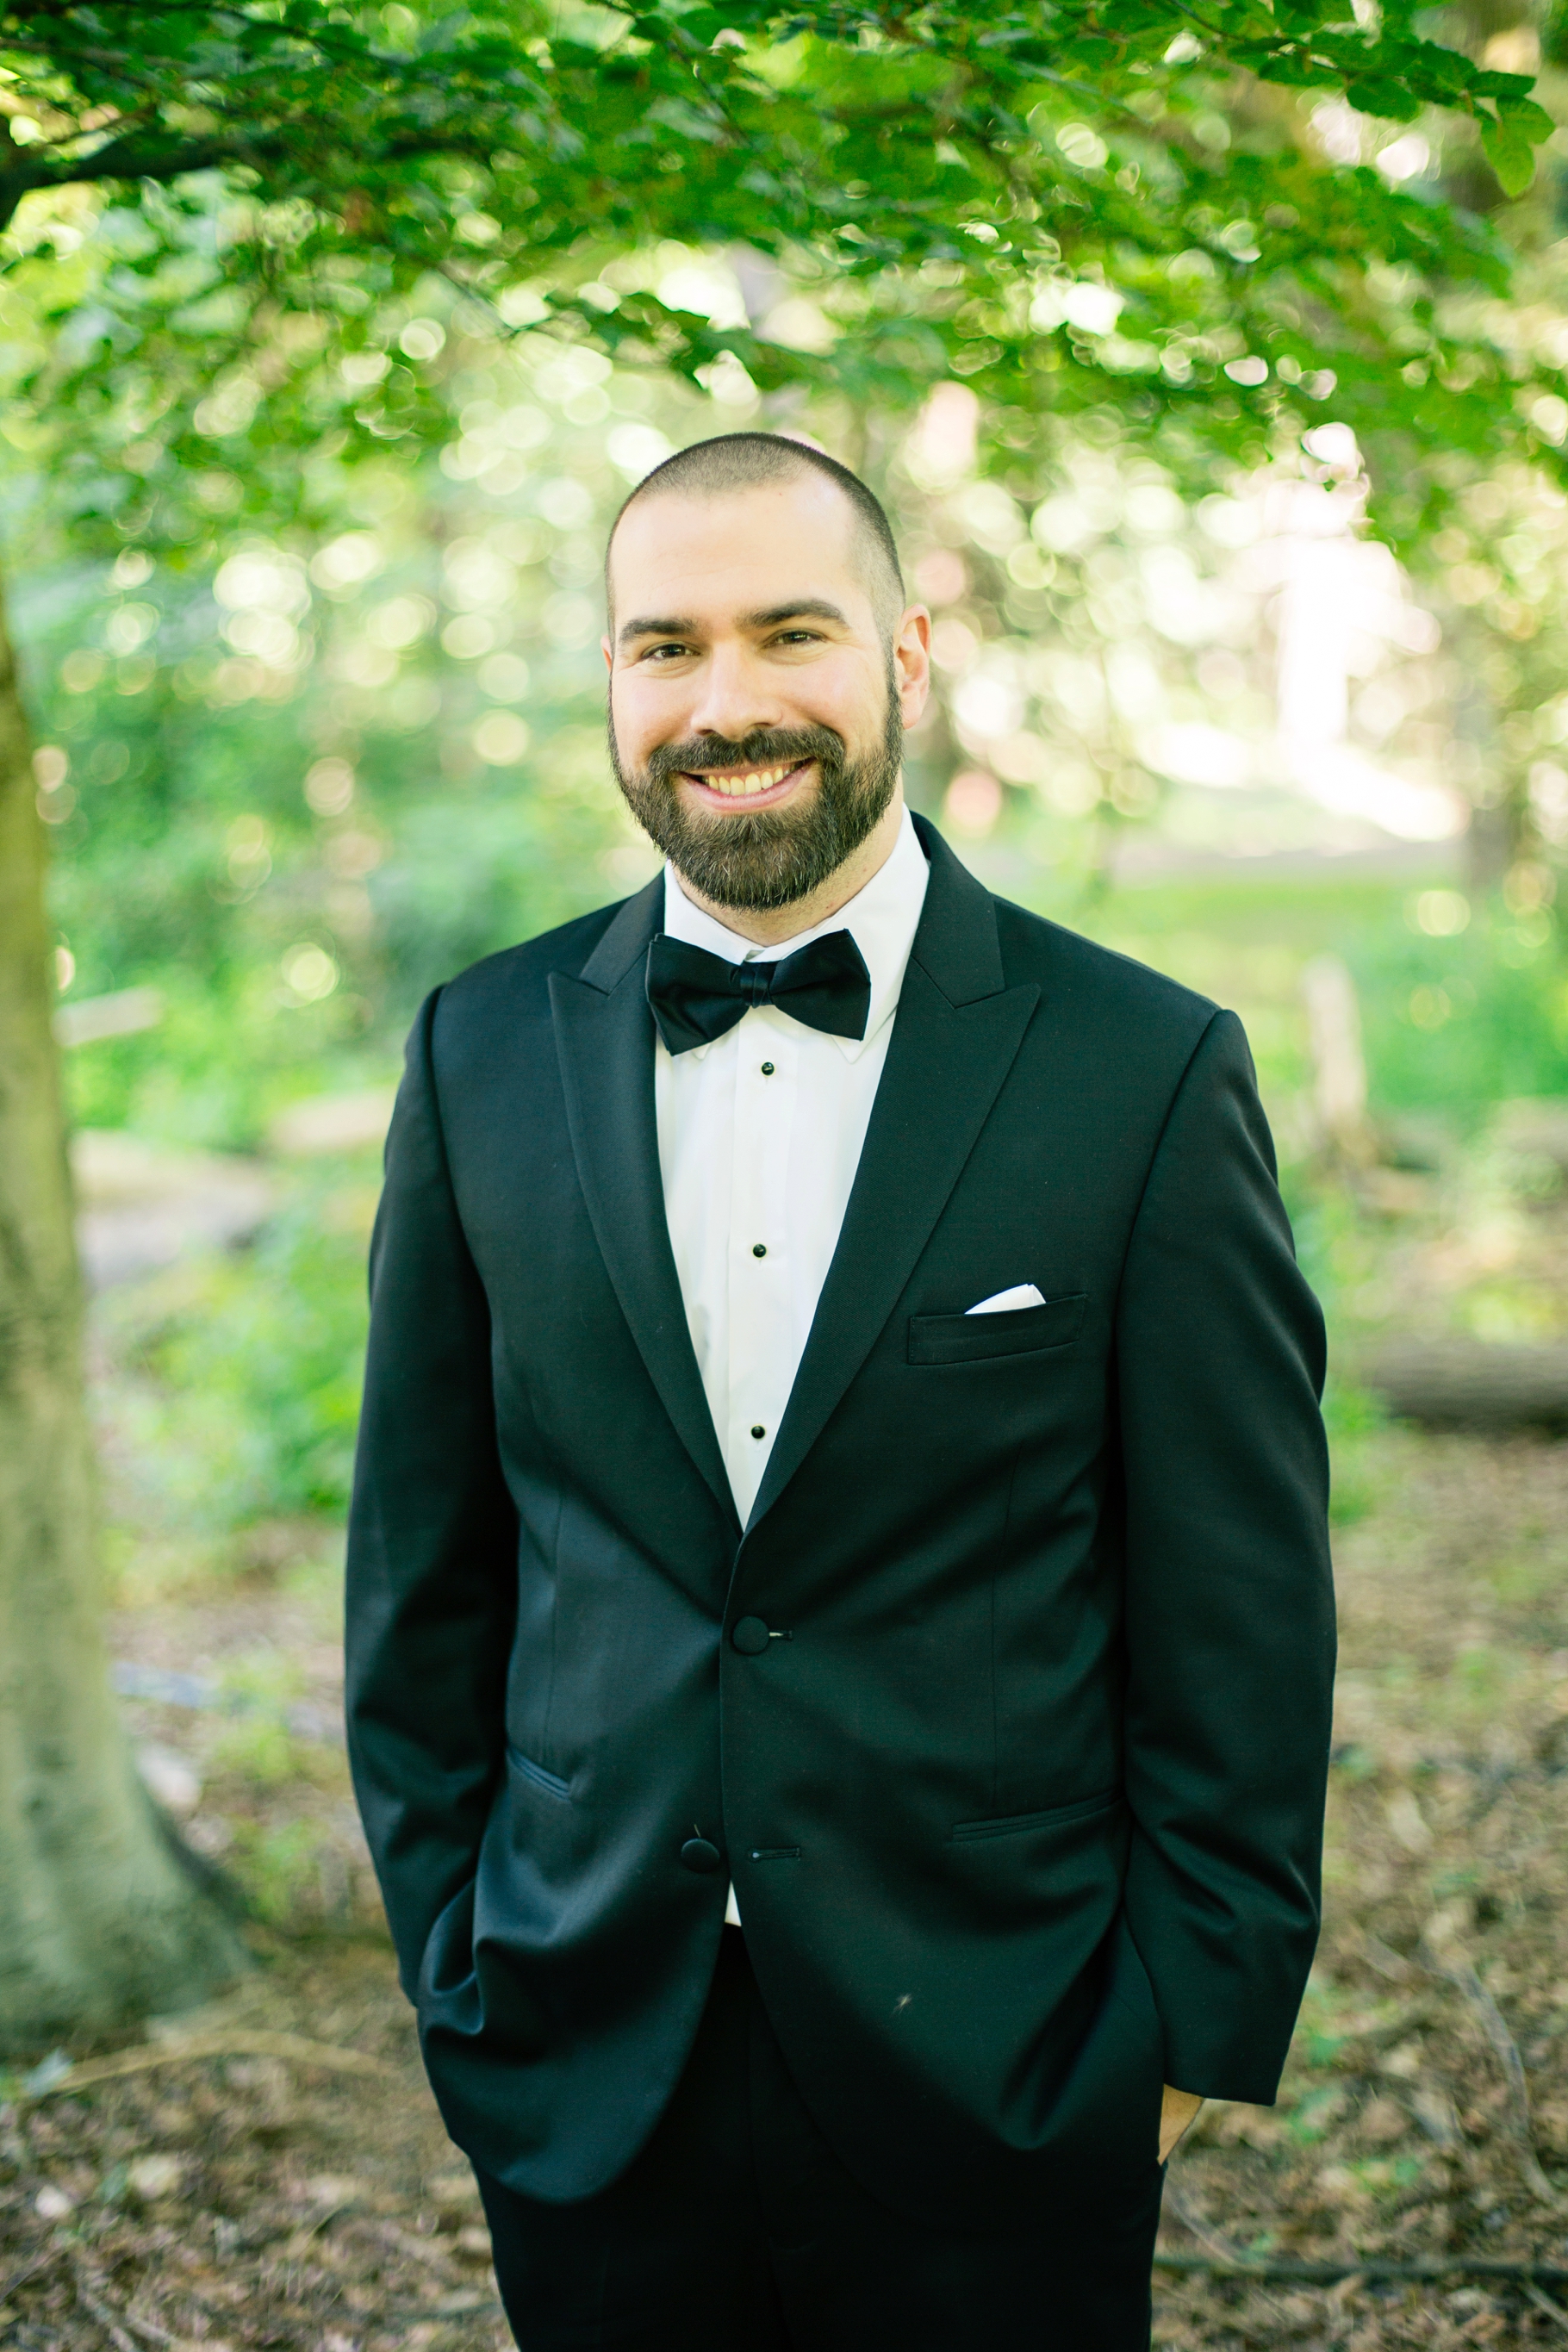 19-Groom-Portraits-Classic-Groom-Style-Bow-Tie-Black-Suit-Woodland-Park-Seattle-Wedding-Photographer-Photography-by-Betty-Elaine